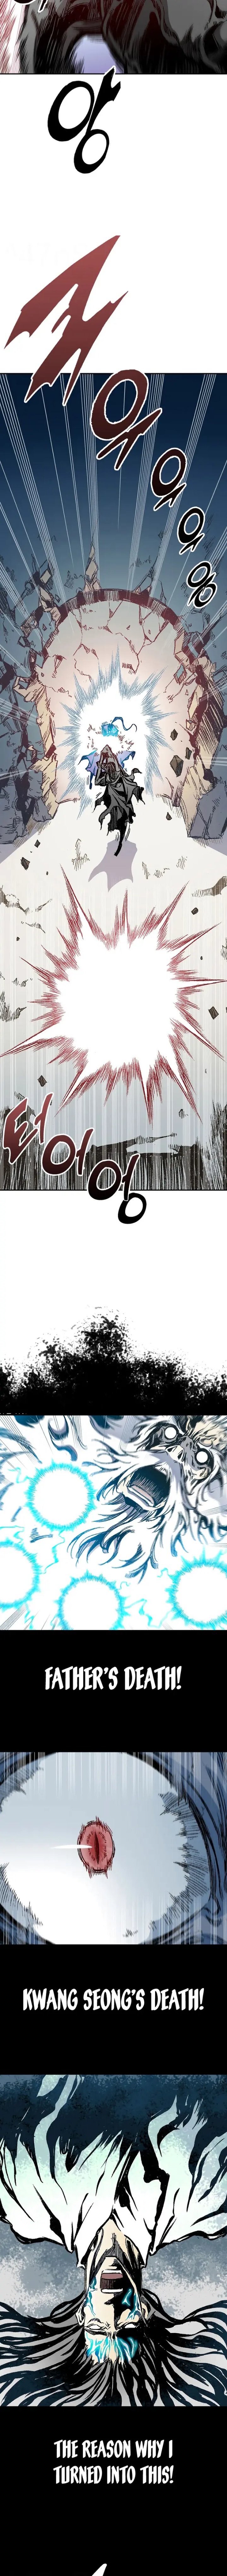 Memoir Of The God Of War Chapter 131 Page 9